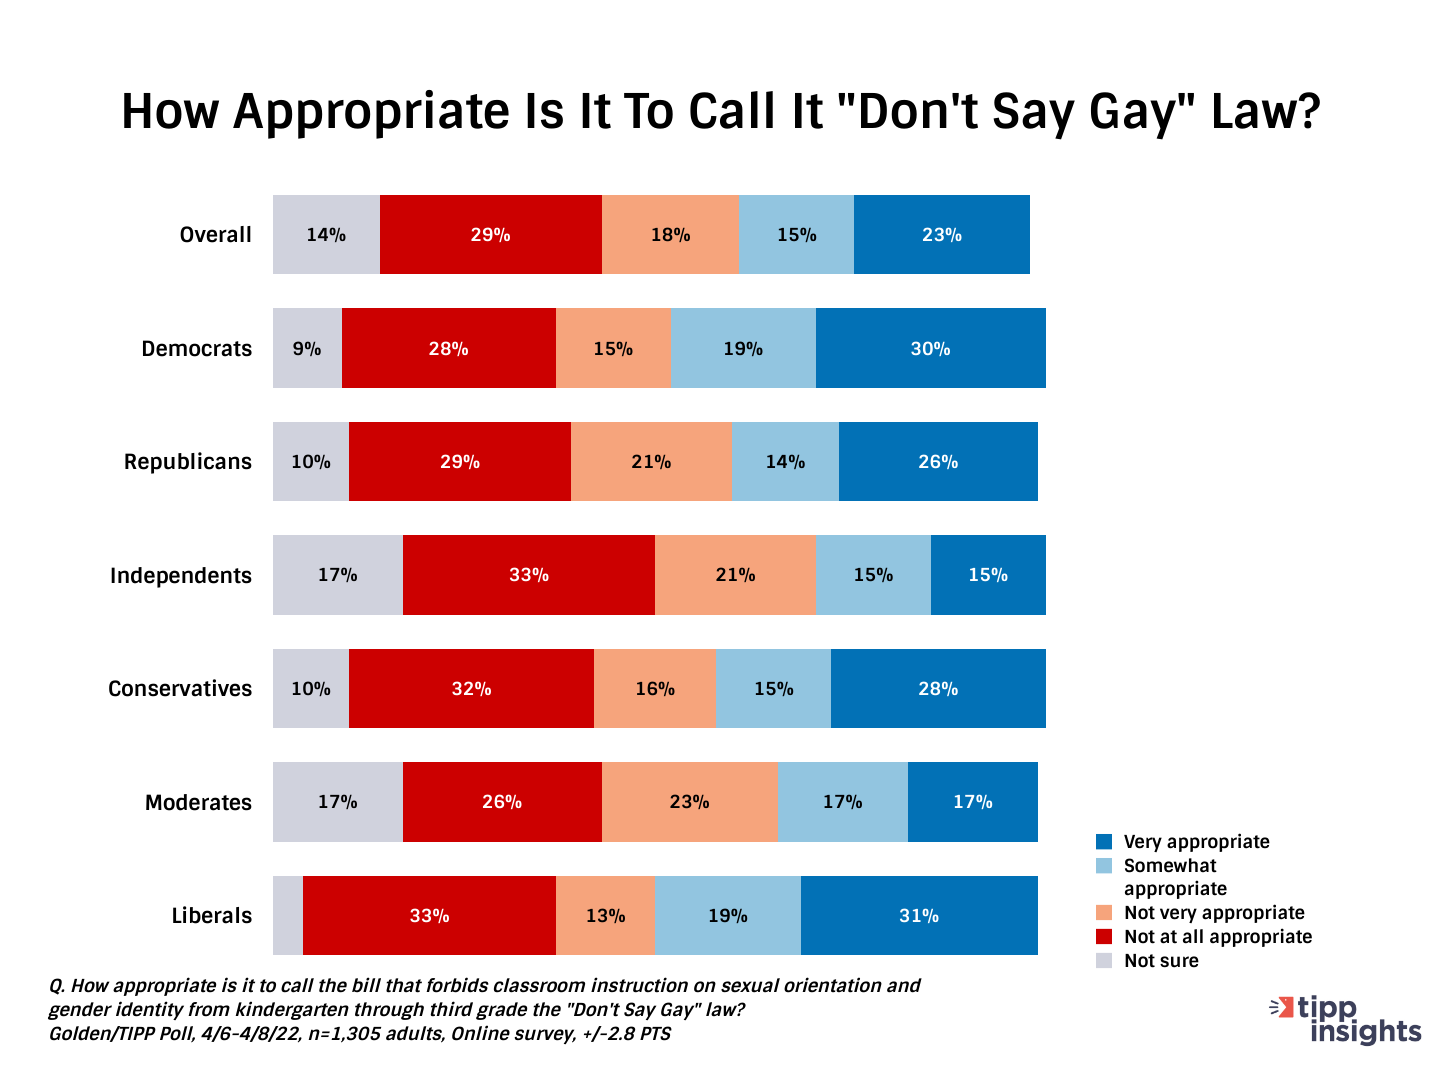 Golden/TIPP Poll Results: How appropriate is it to call Florida's Educational Bill " Don' Say Gay" bill.